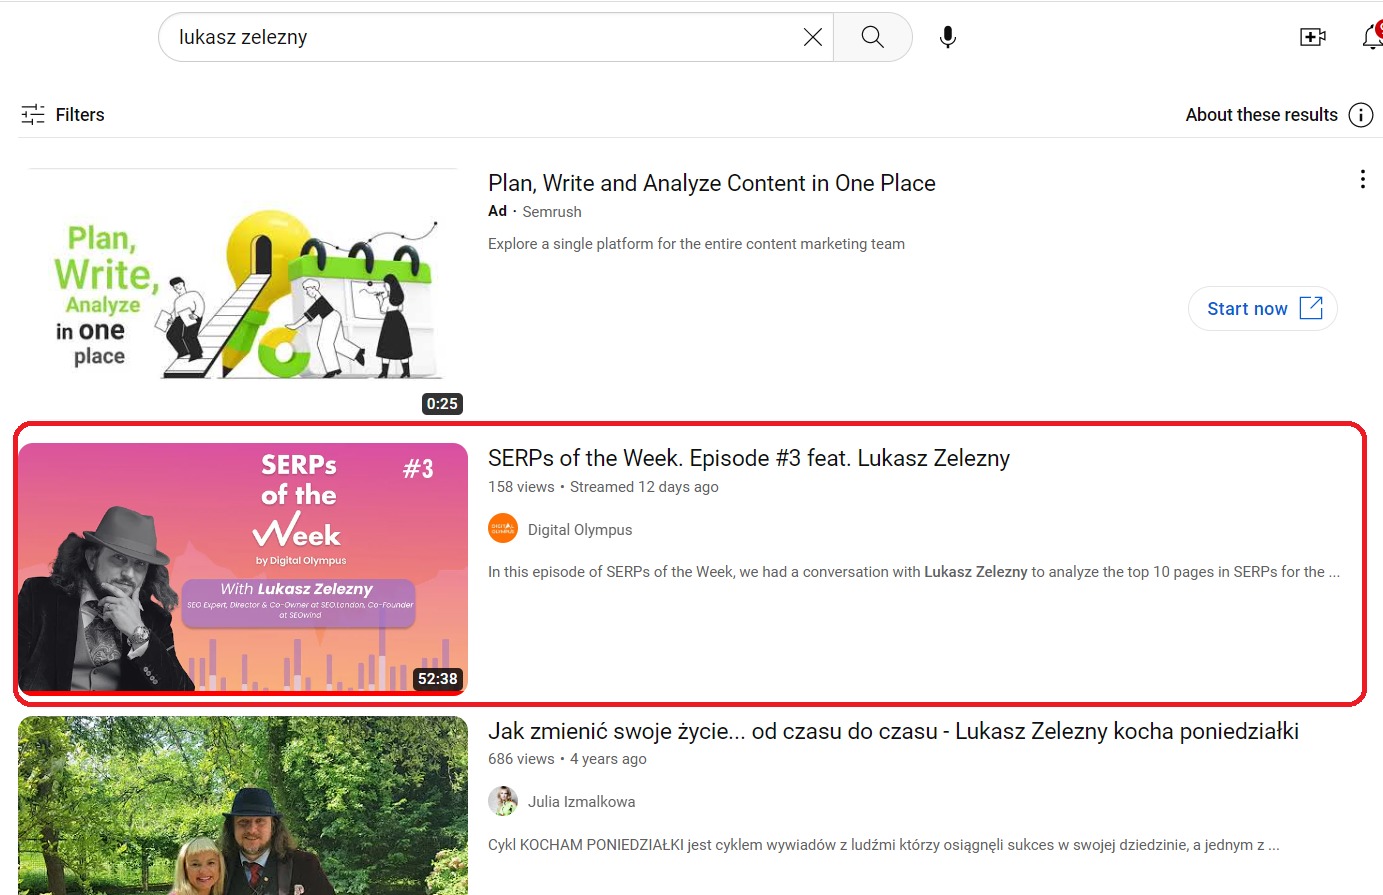 YouTube search appearance of the SERPs of the Week episode with Lukasz Zelezny